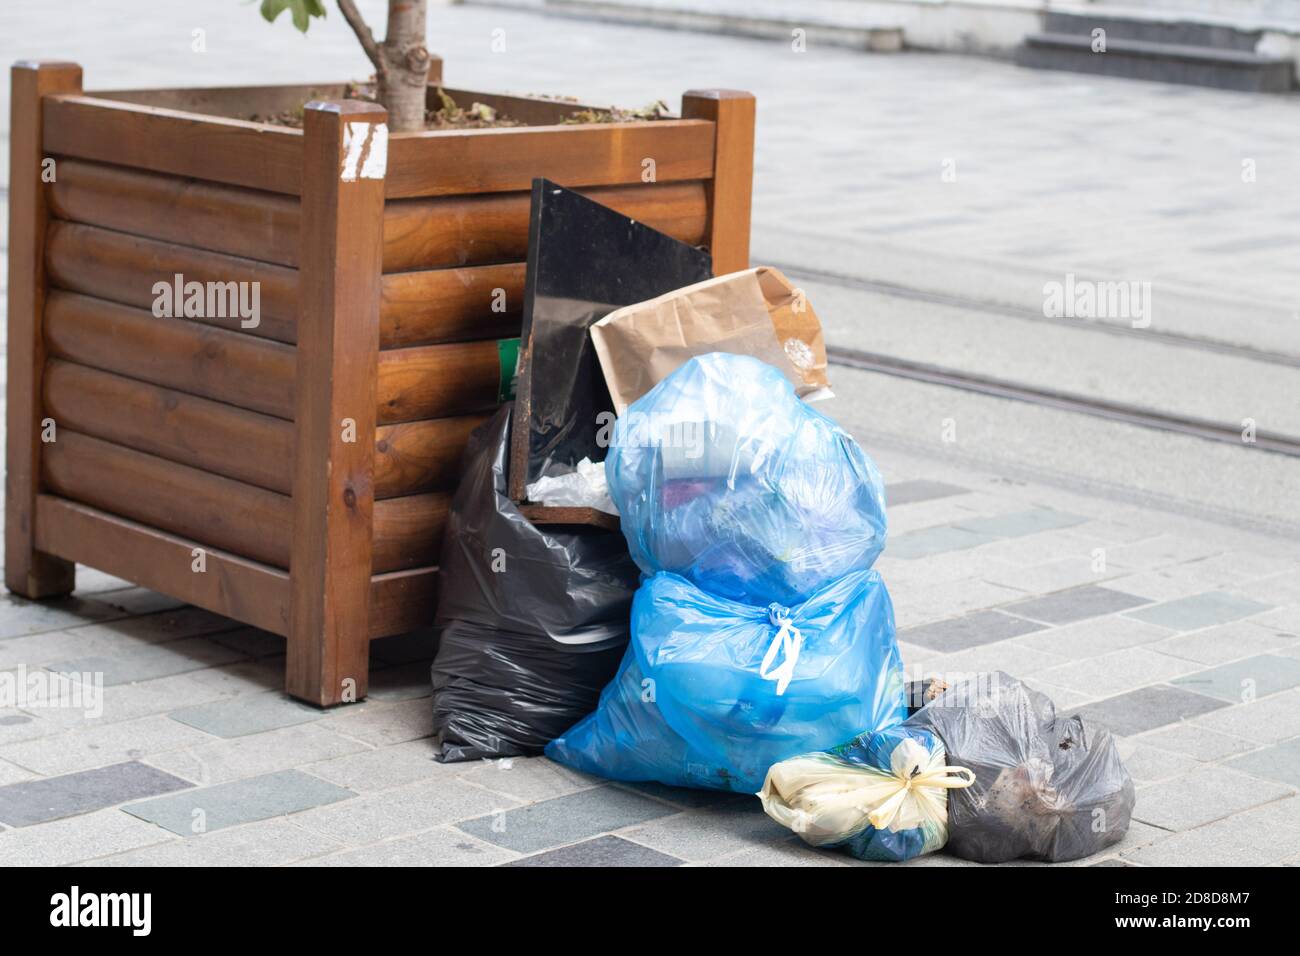 Garbage bags on the street of a european city Stock Photo